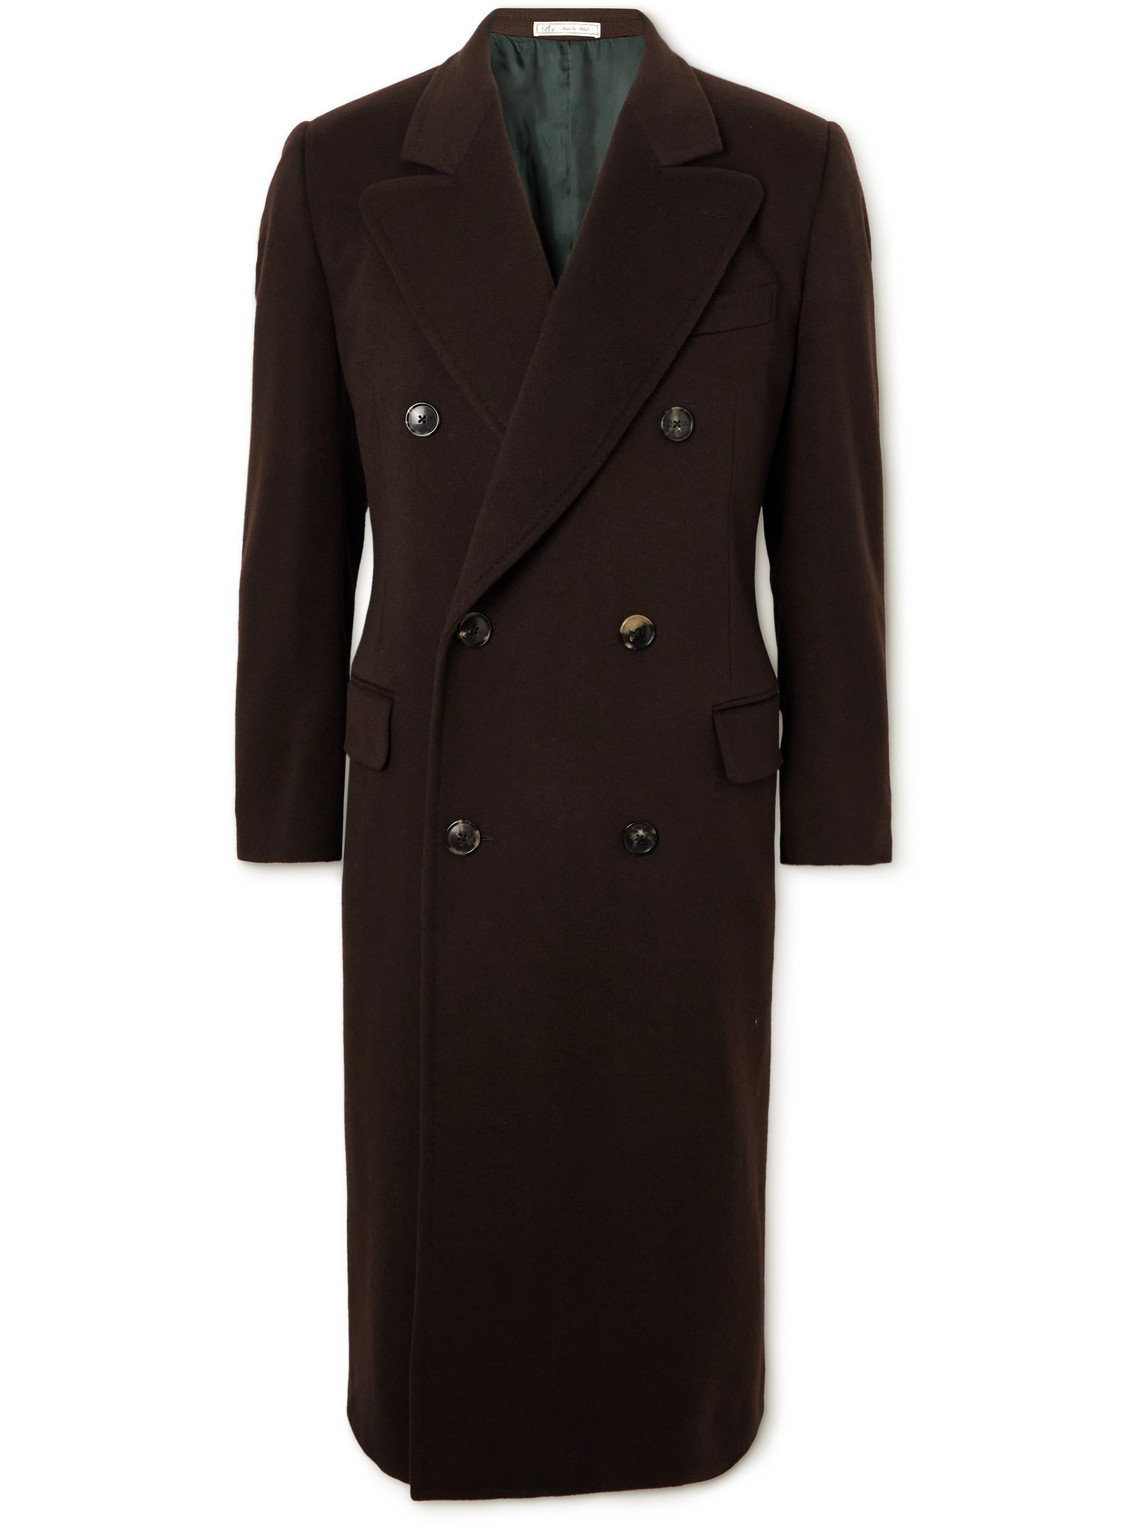 Umit Benan B+ Posillipo Double-breasted Cashmere Overcoat In Brown